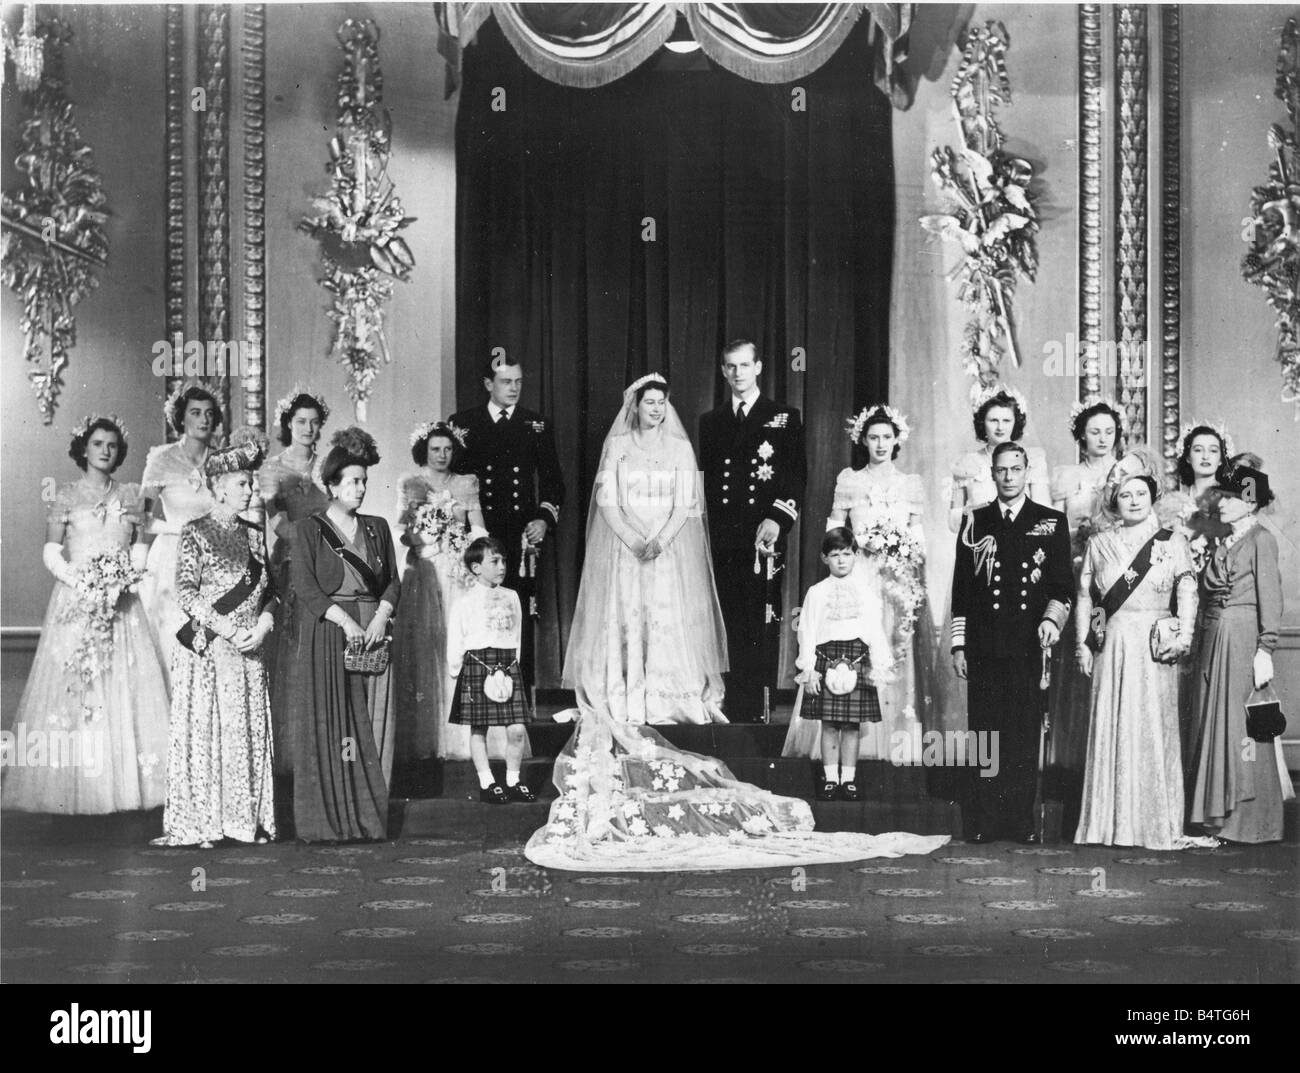 Princess Elizabeth Queen Elizabeth II marries the Duke of Edinburgh 20 November 1947 The wedding party pictured in Buckingham Palace Front row left to right Queen Mary Princess Andrew of Greece the bridegroom s mother the pages Prince William of Gloucester and Prince Michel of Kent The King and Queen and Dowager Marchioness of Milford Haven second row left to right four bridesmaids The Hon Margaret Elphinstone Lady Pamela Mountbatten Lady Mary Cambridge and Princess Alexandra groomsman the Marquess of Milford Haven and the other four bridesmaids Princess Margaret Lady Caroline Montagu Bouglas Stock Photo